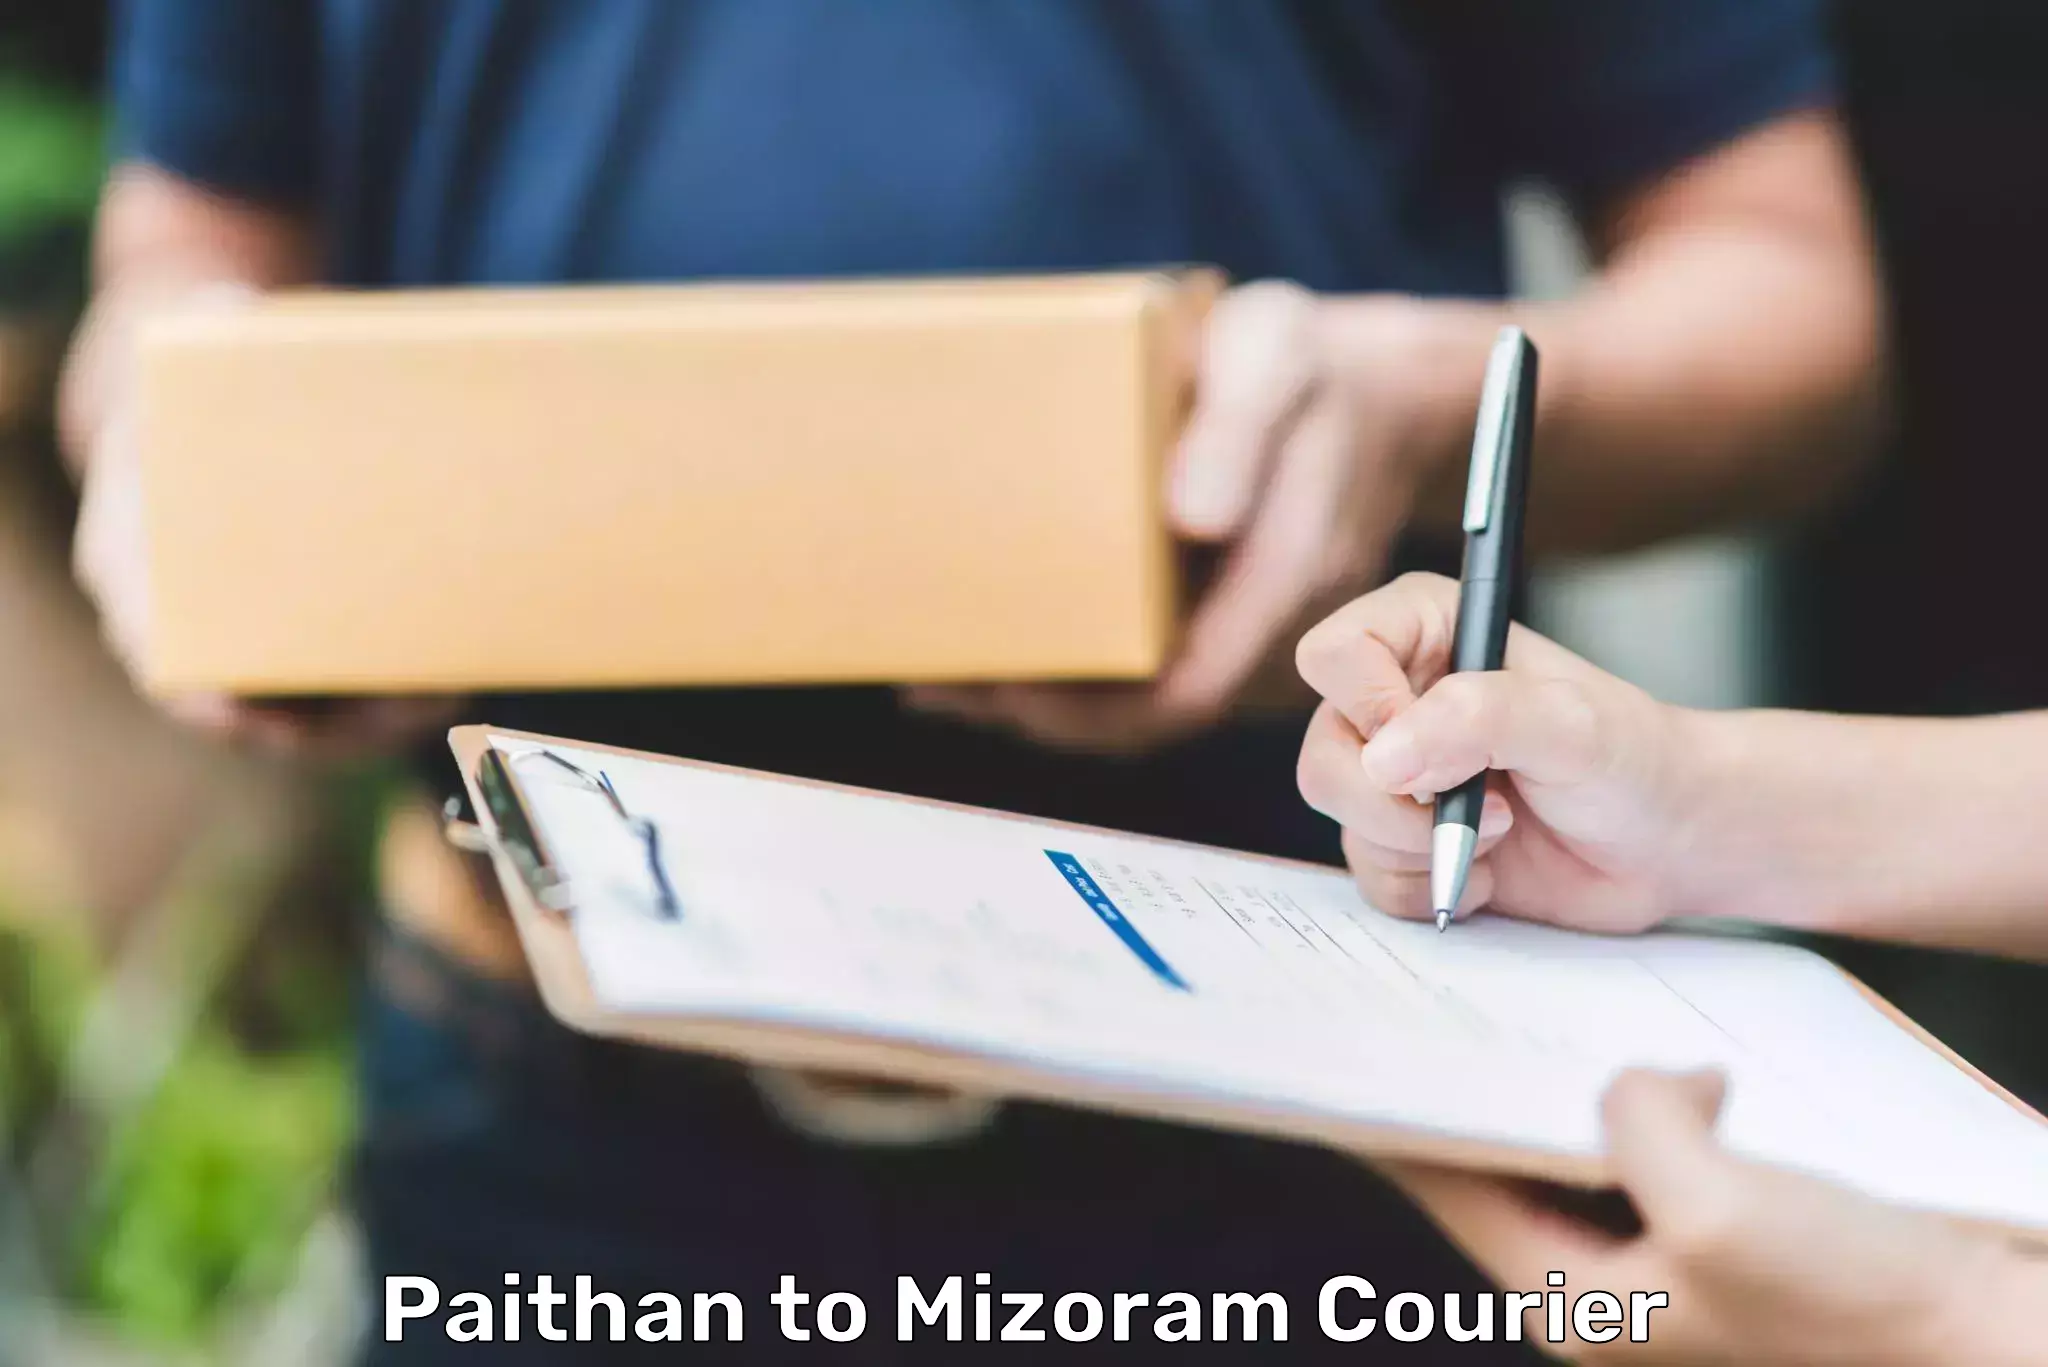 Cash on delivery service Paithan to Mizoram